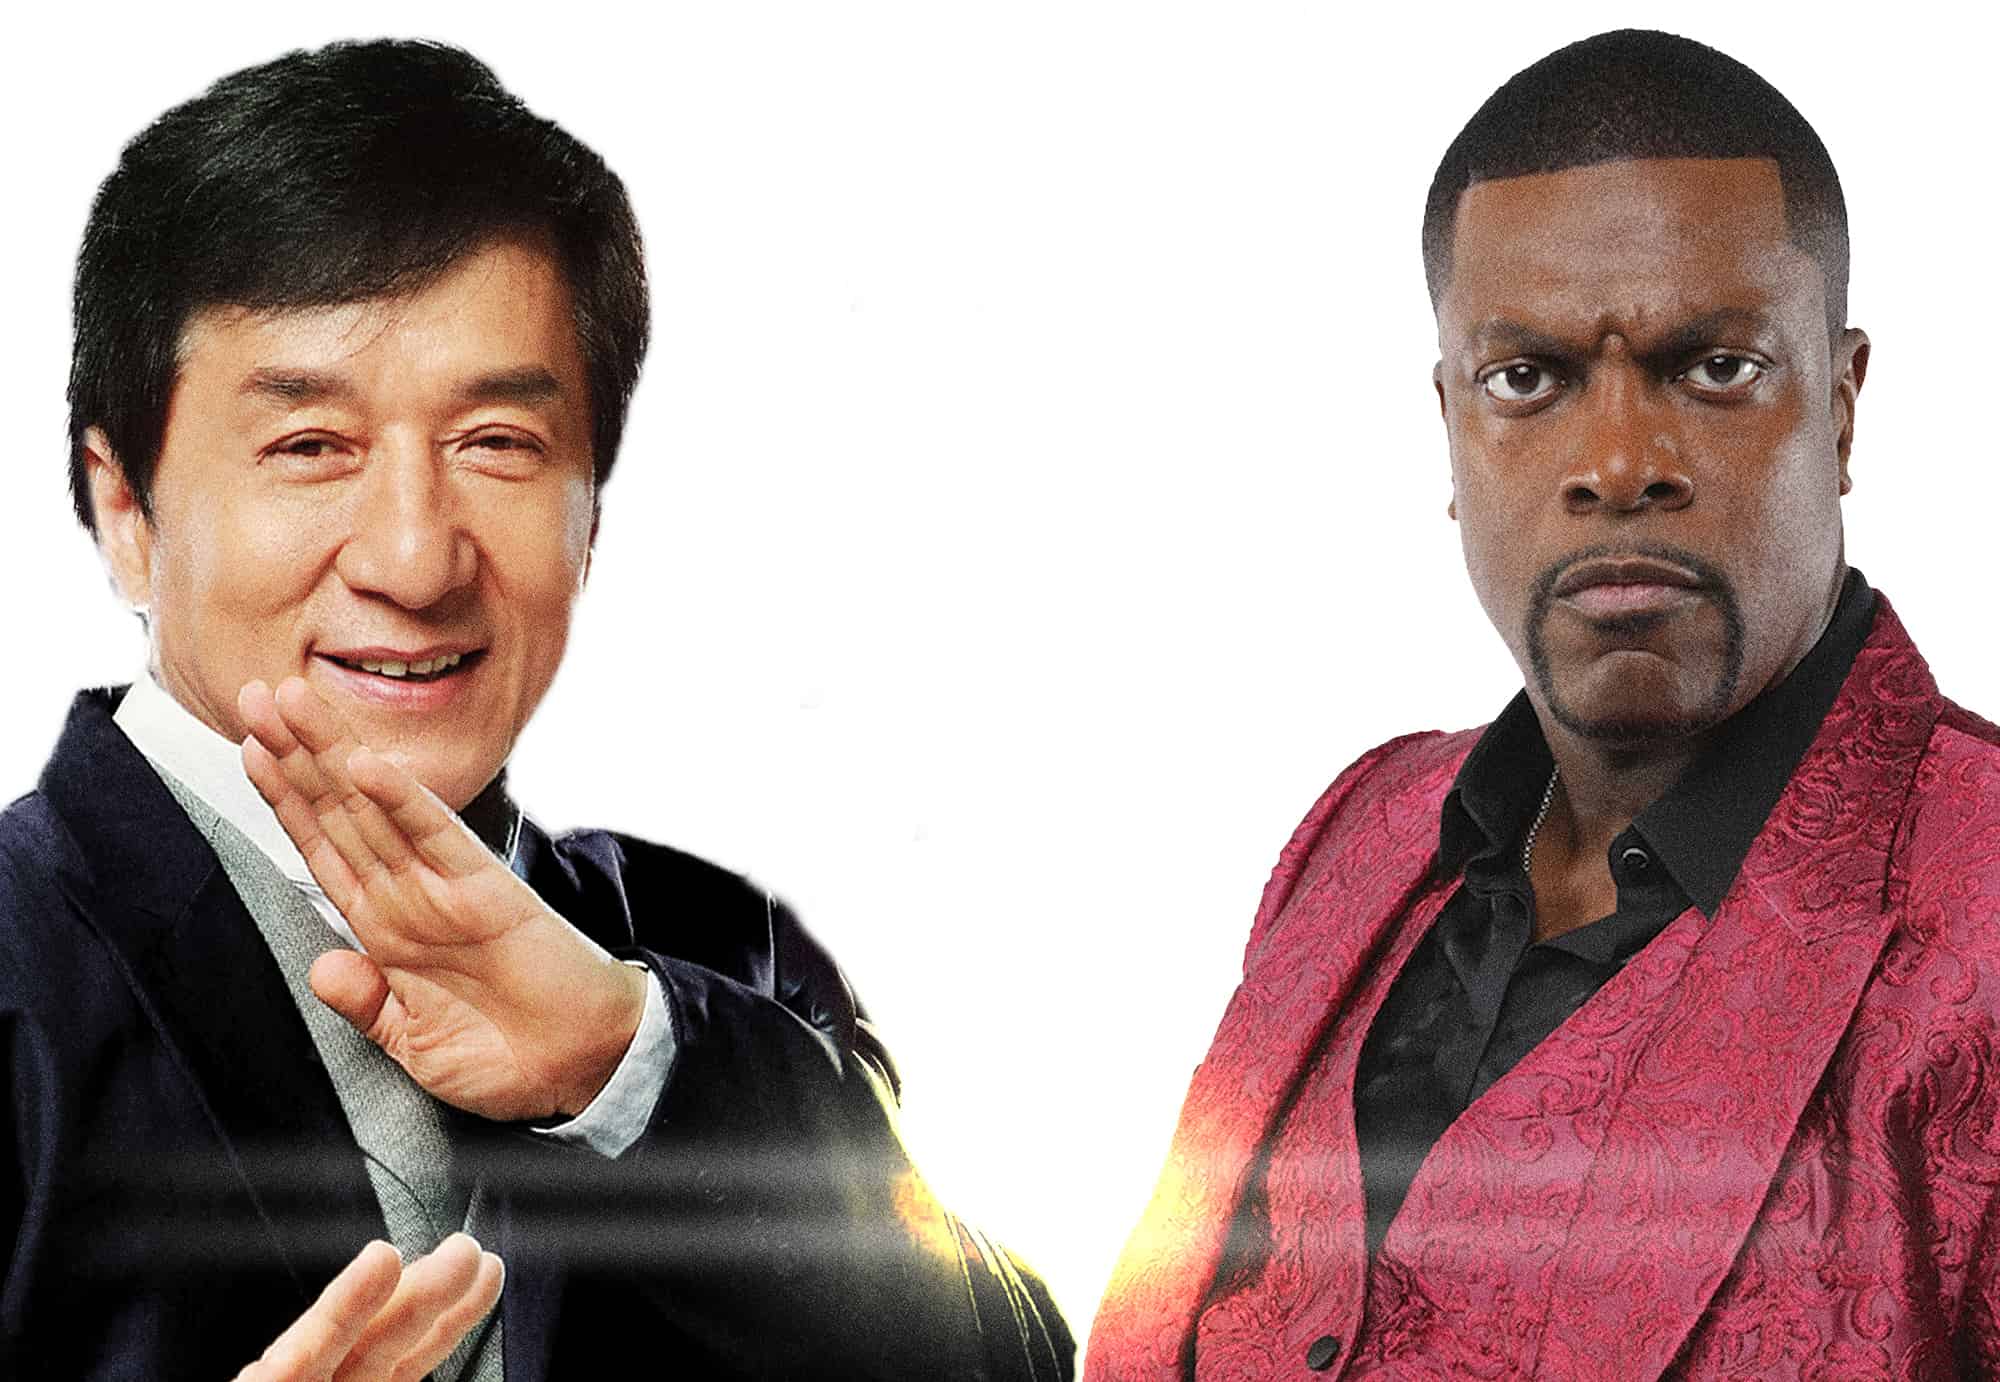 Rush Hour 4' — Everything We Know About the Planned Sequel So Far